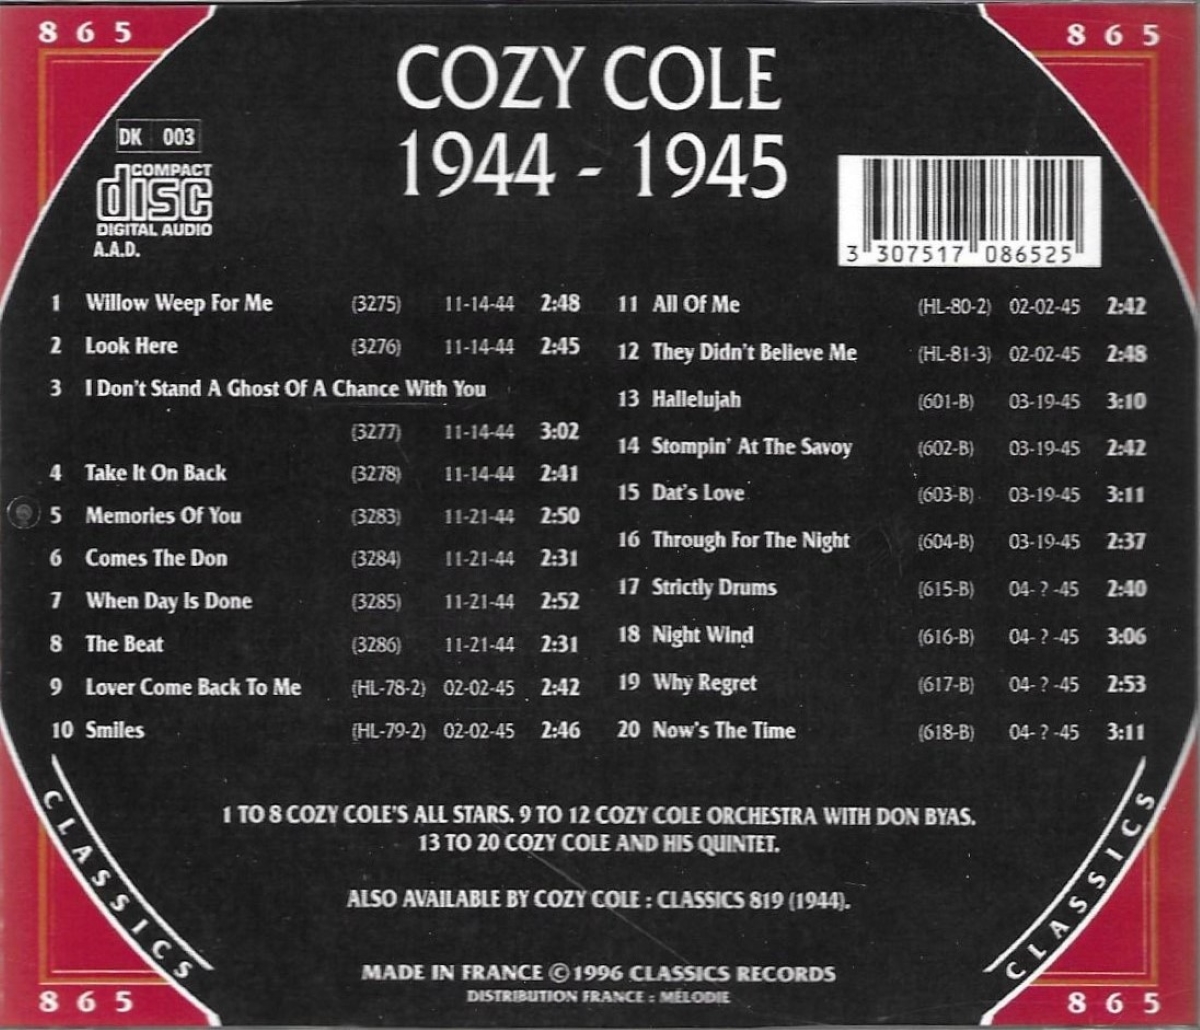 The Chronological Cozy Cole-1944-1945